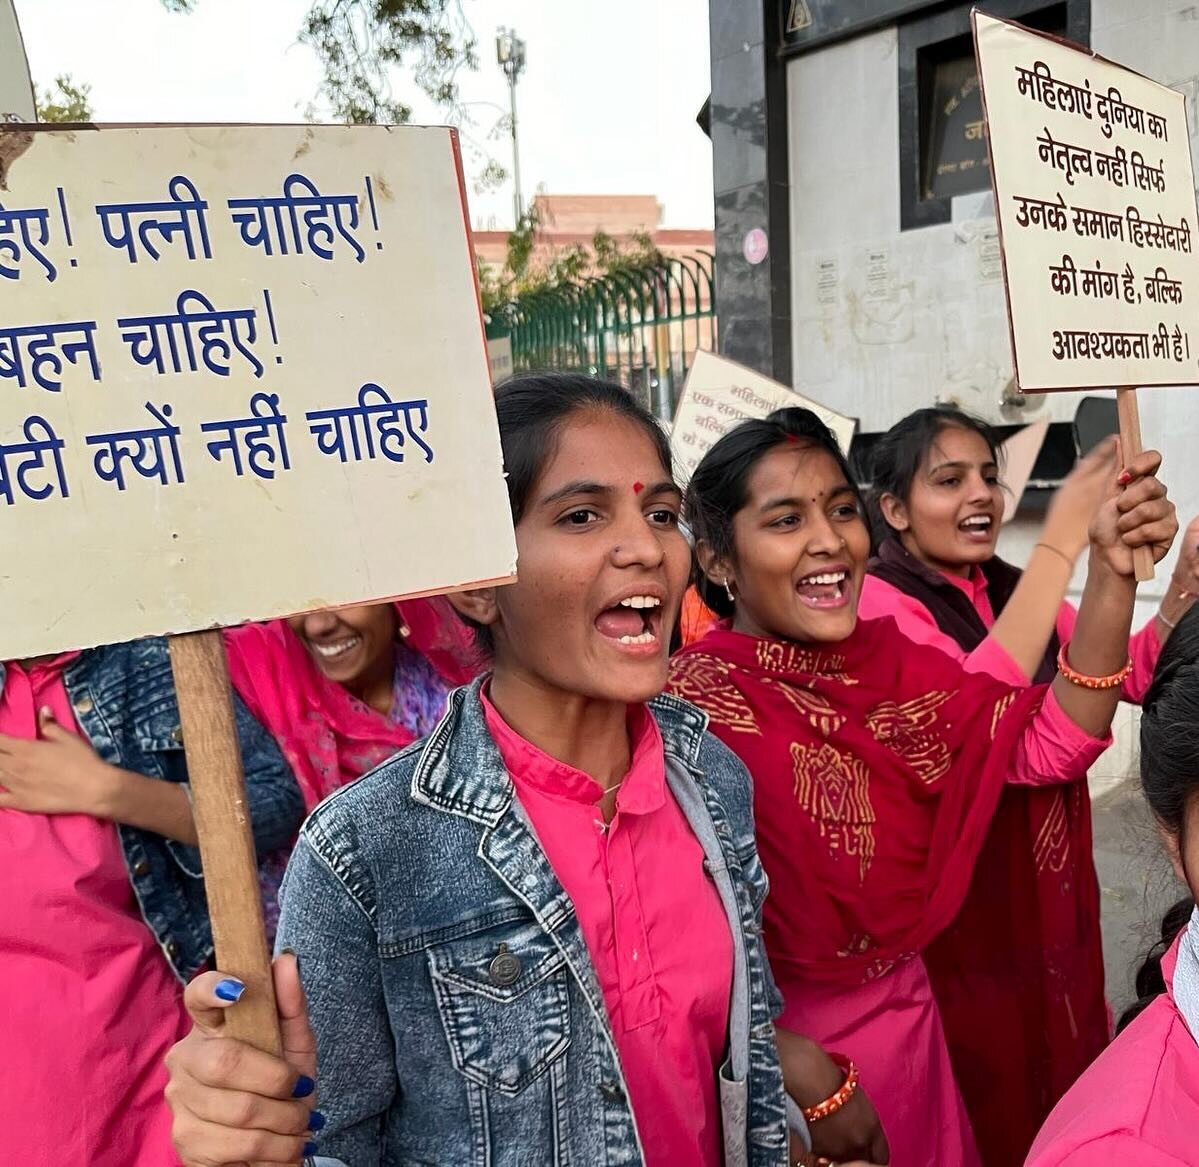 The women and girls of Sambhali are marching for #inclusion on #InternationalWomensDay and everyday! 

🌸&ldquo;The International Women&rsquo;s Day march is important to spread the message that women should be independent and free. I feel it is my da